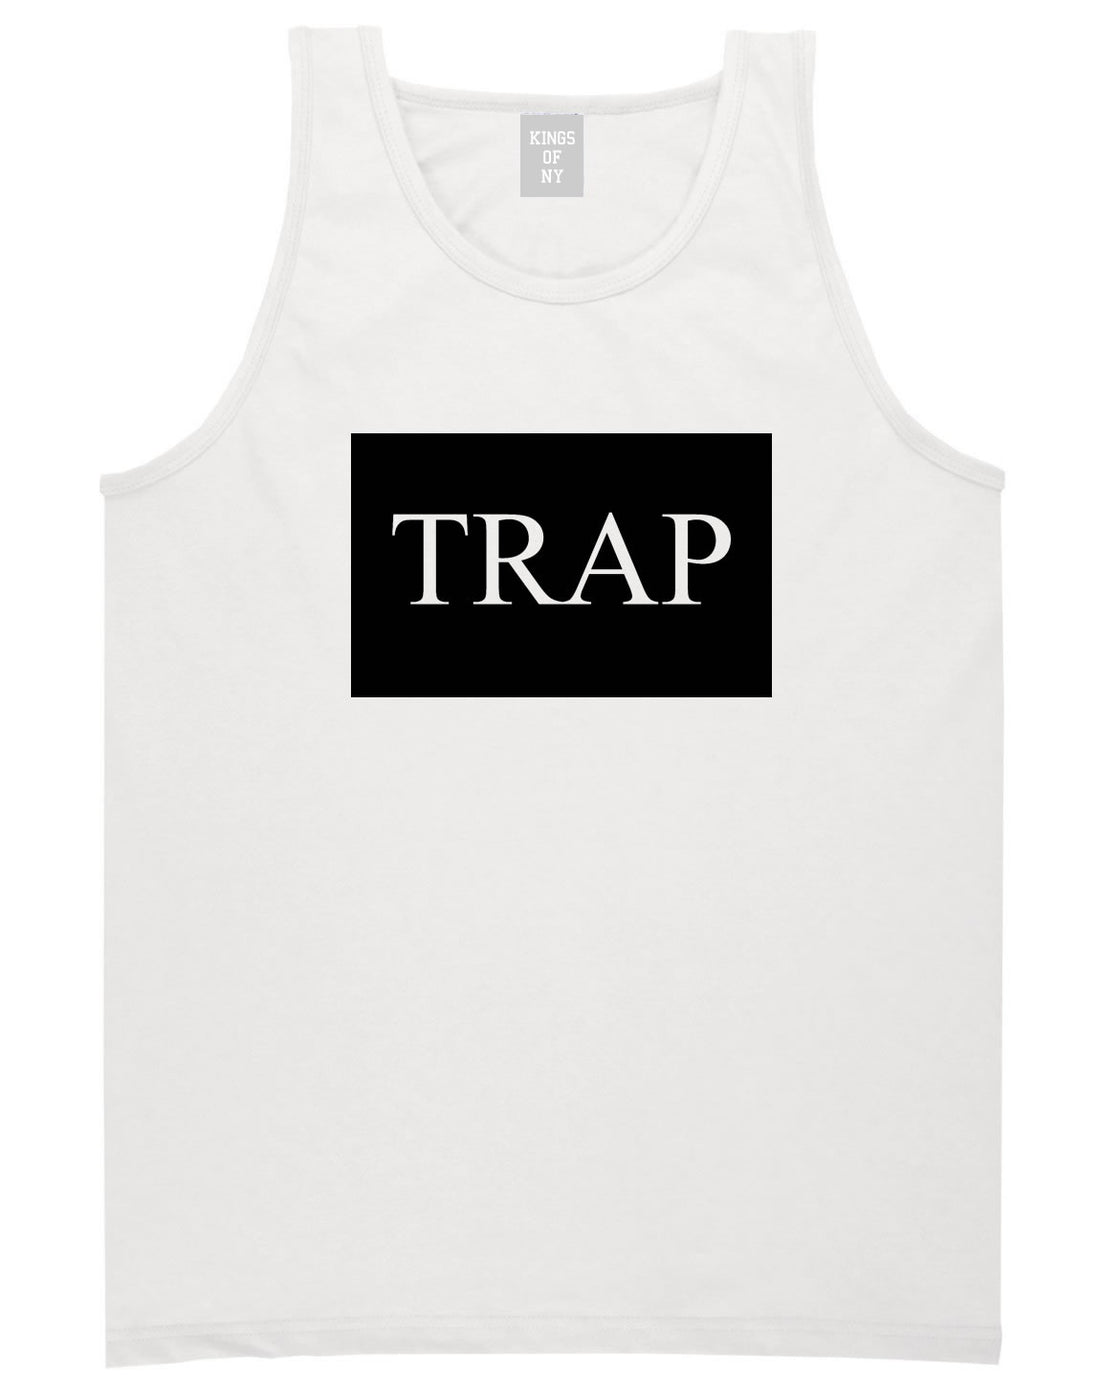 Trap Rectangle Logo Tank Top in White By Kings Of NY